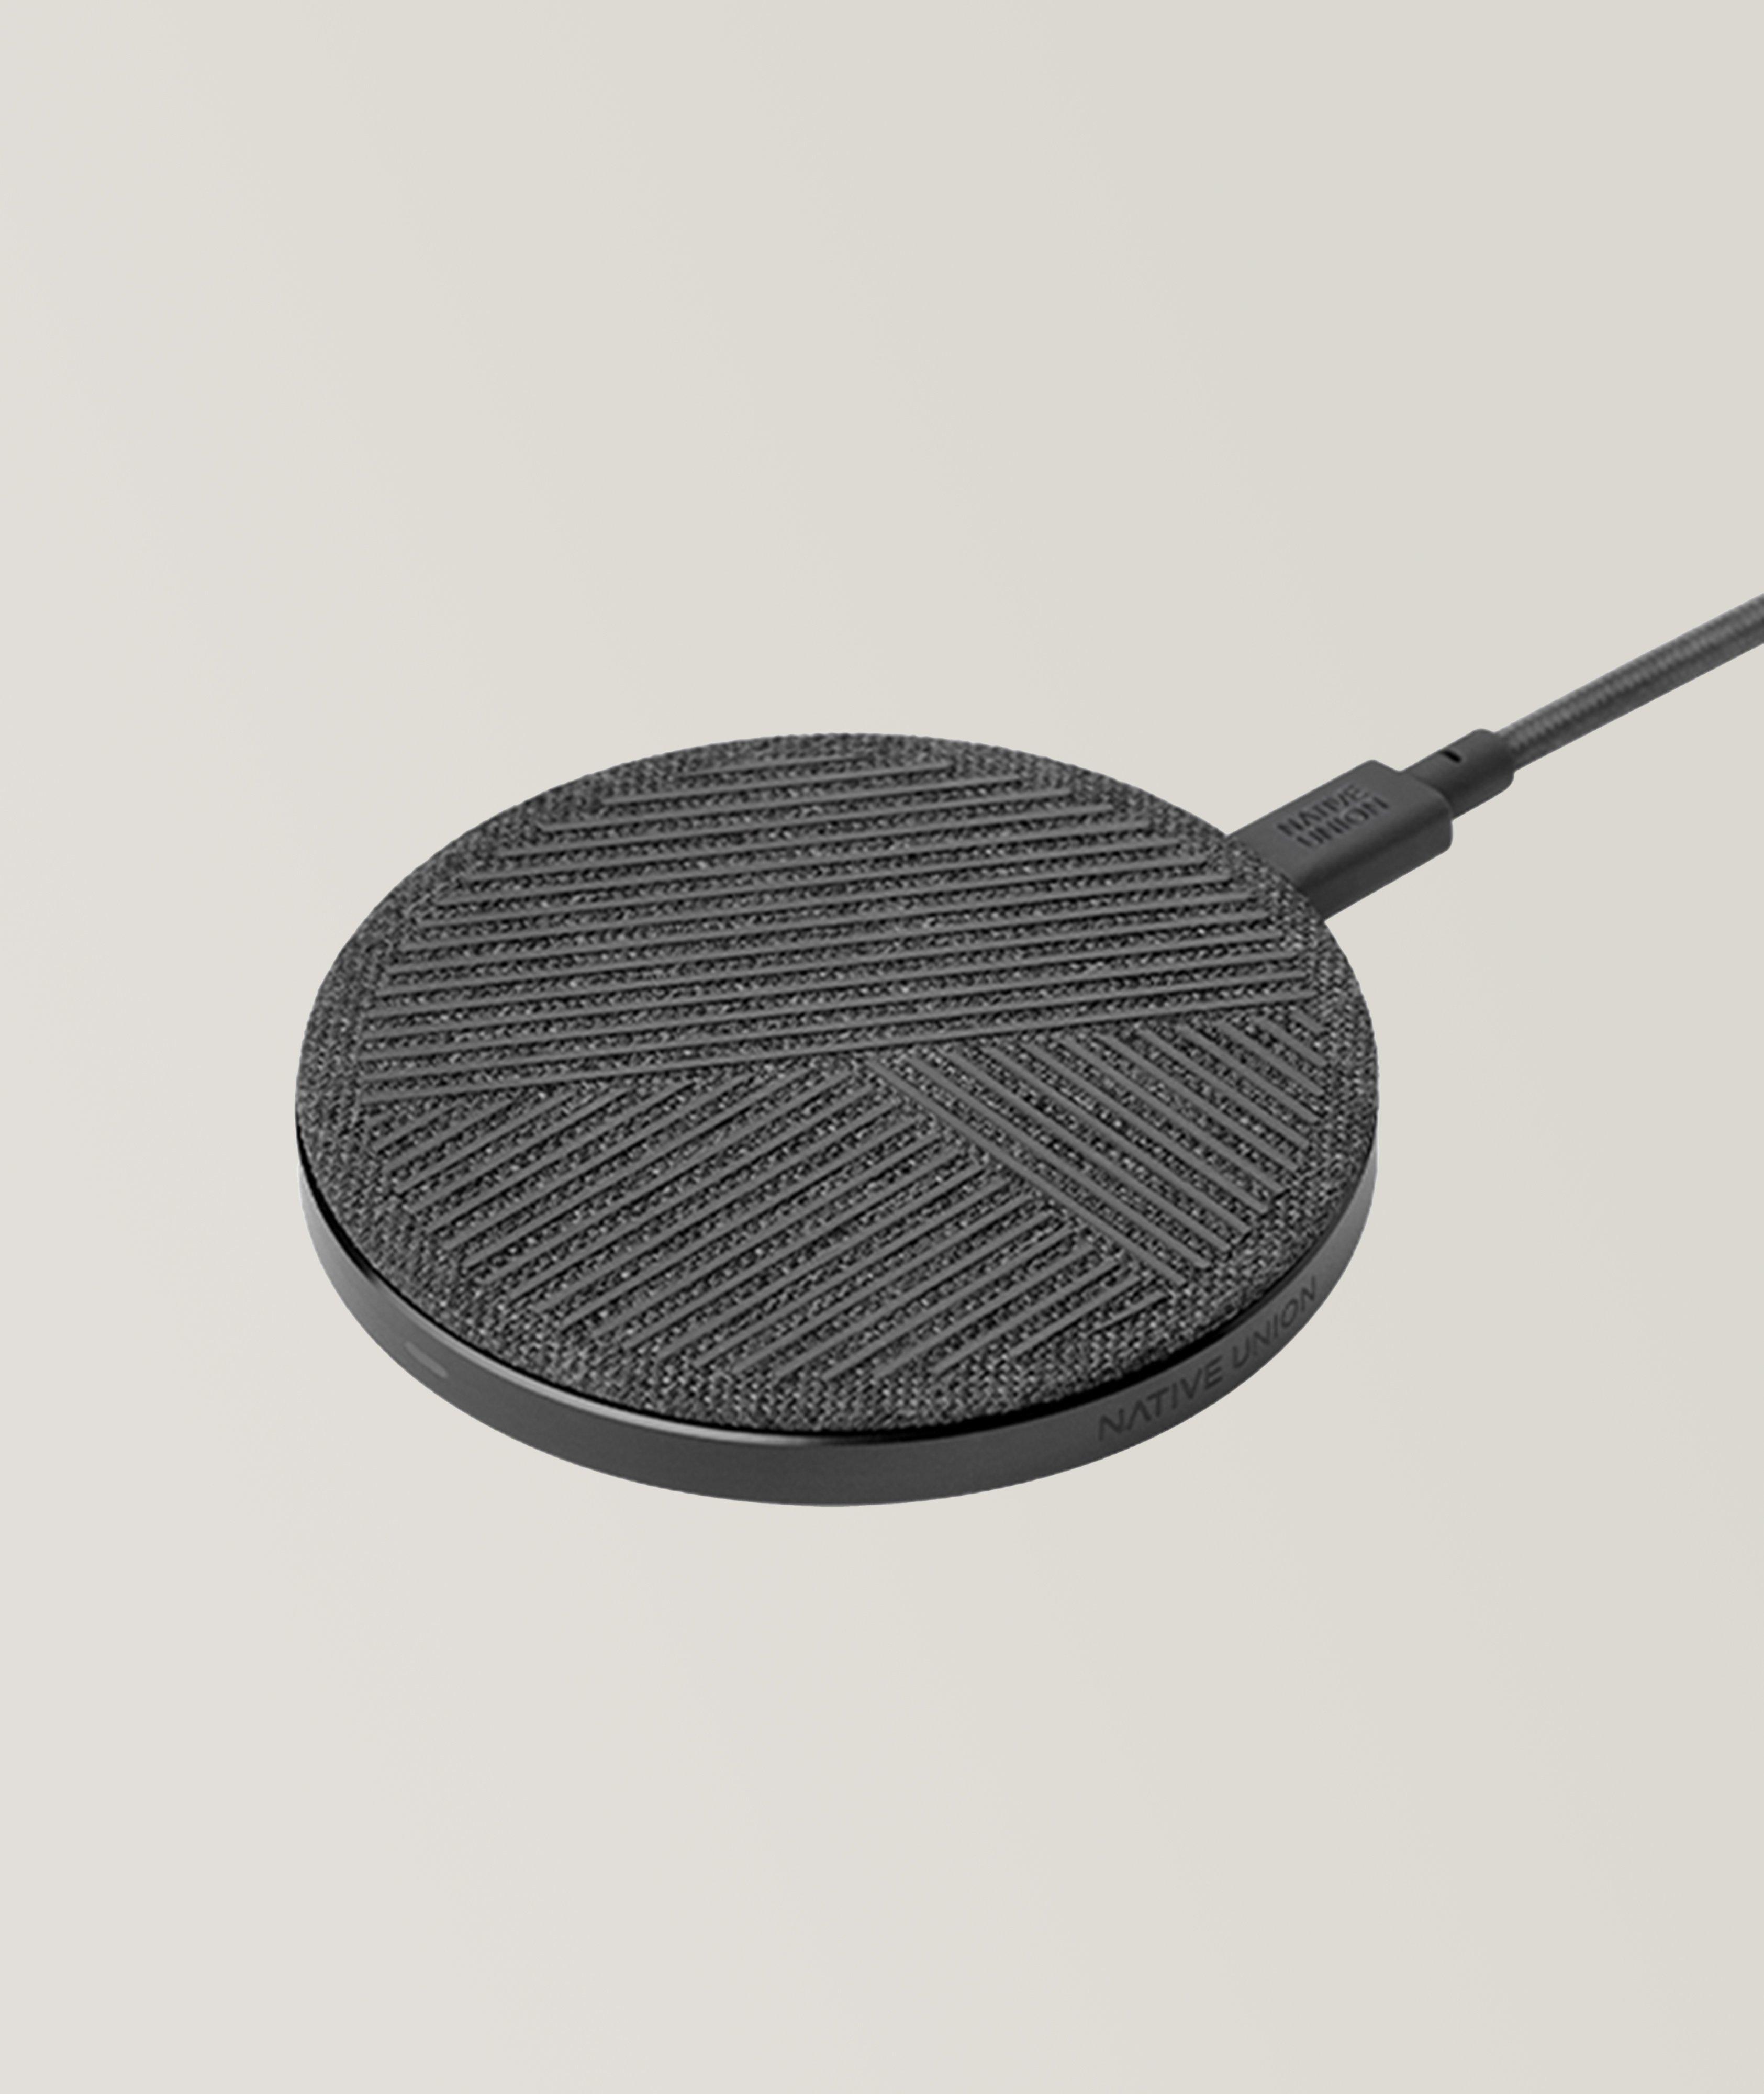 Drop Qi Wireless Charger image 0